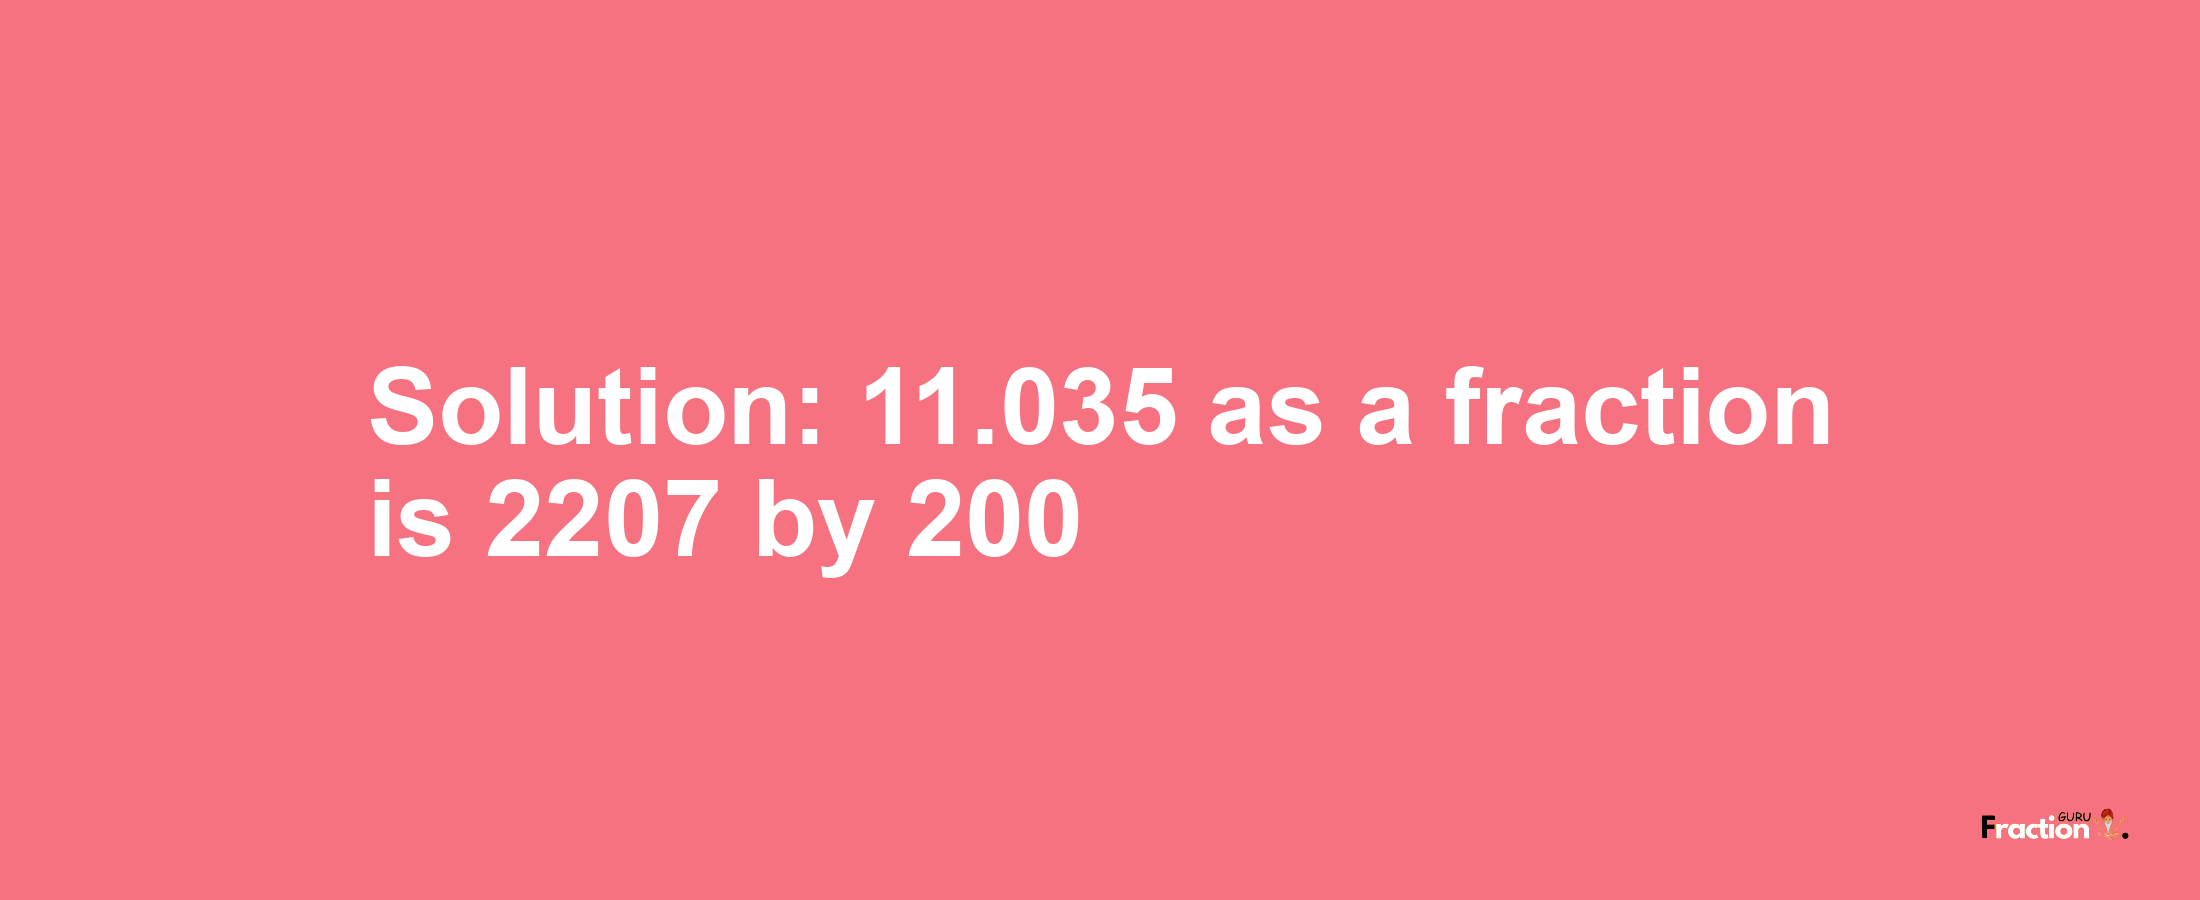 Solution:11.035 as a fraction is 2207/200